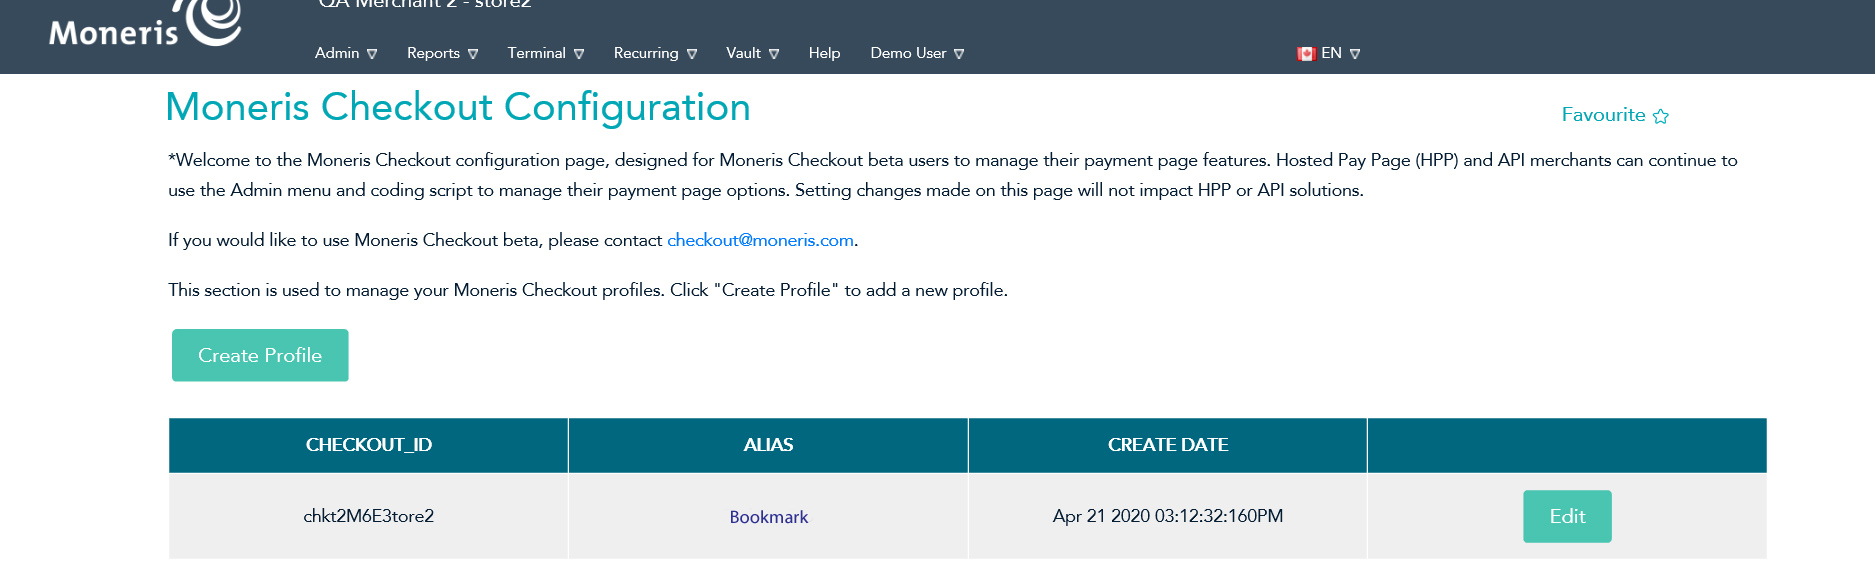 The Moneris Checkout Configuration page, displaying a configuration called Bookmark.